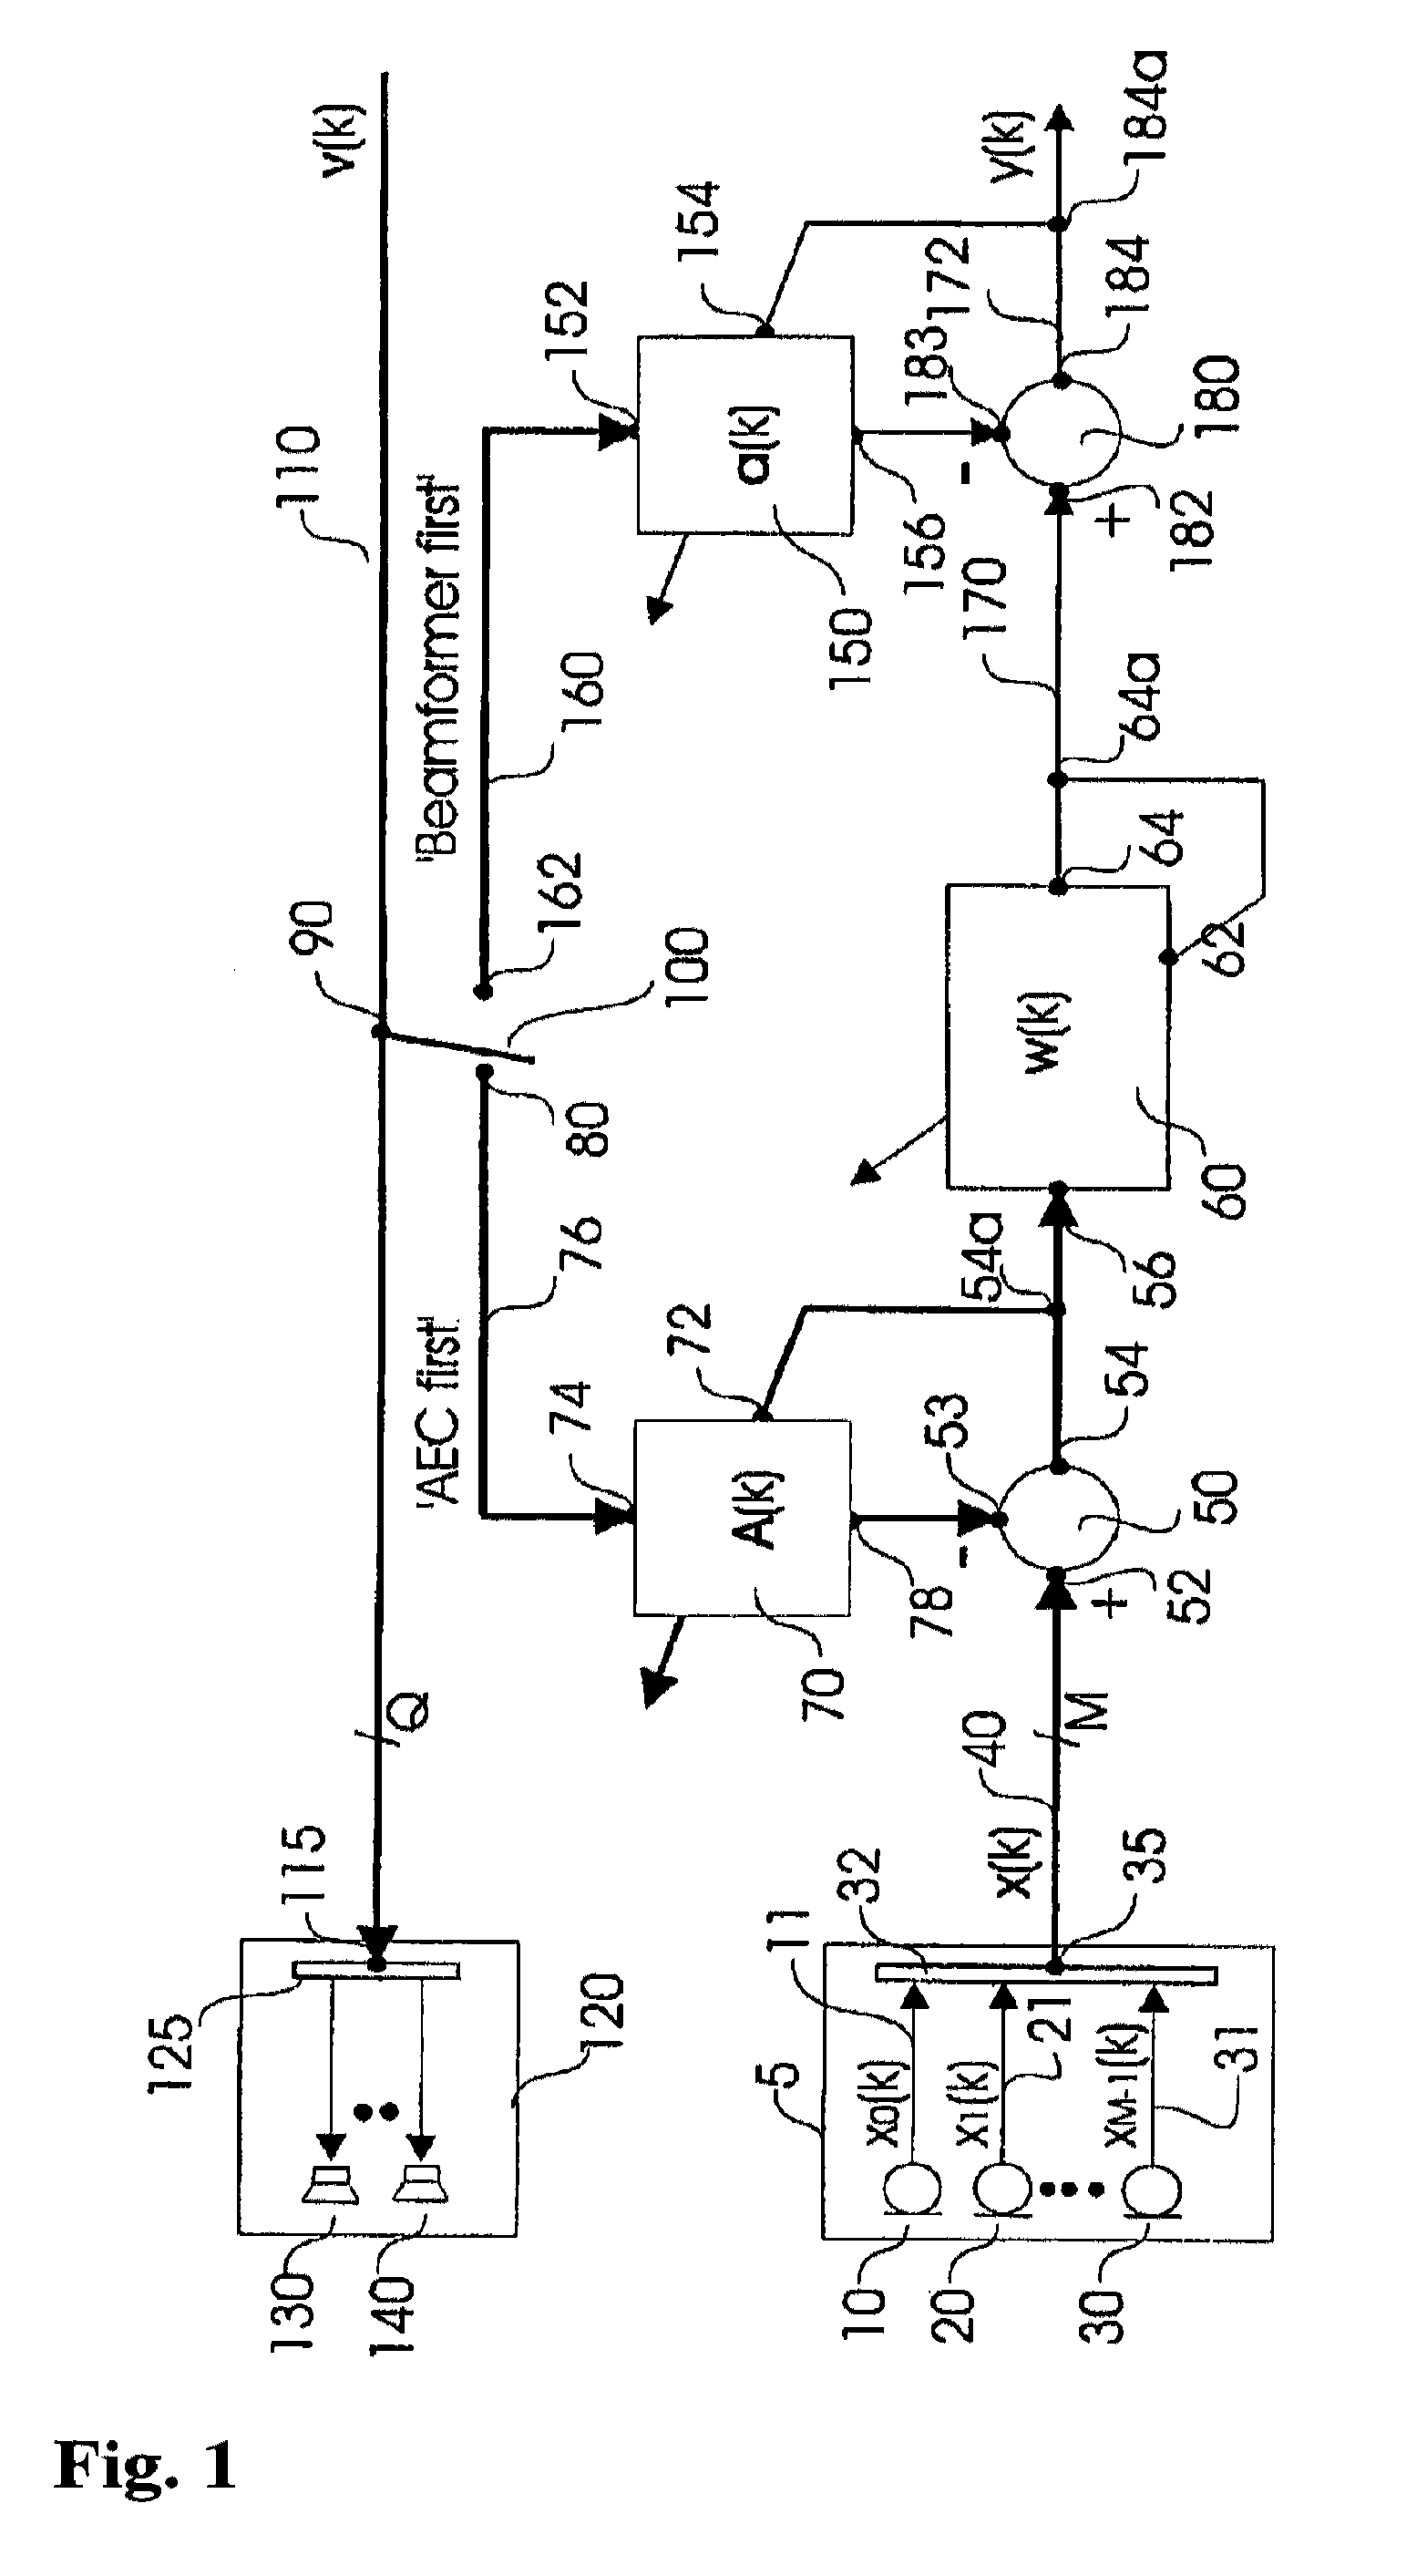 Acoustic echo cancellation for time-varying microphone array beamsteering systems